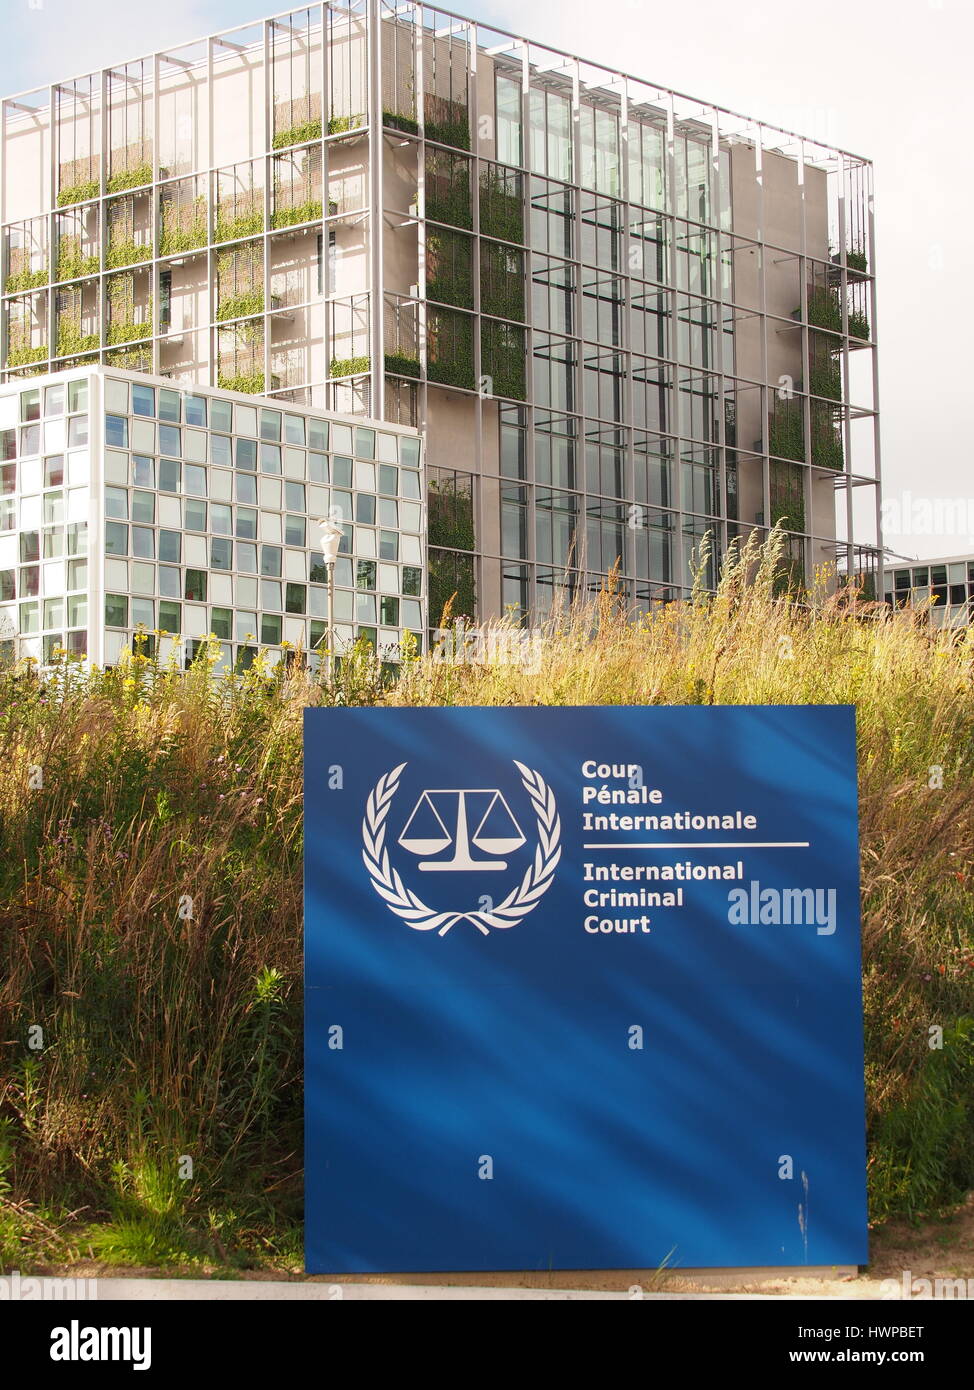 The Hague, Netherlands - July 5, 2016: The International Criminal Court entrance sign and the new 2016 opened ICC building. Stock Photo